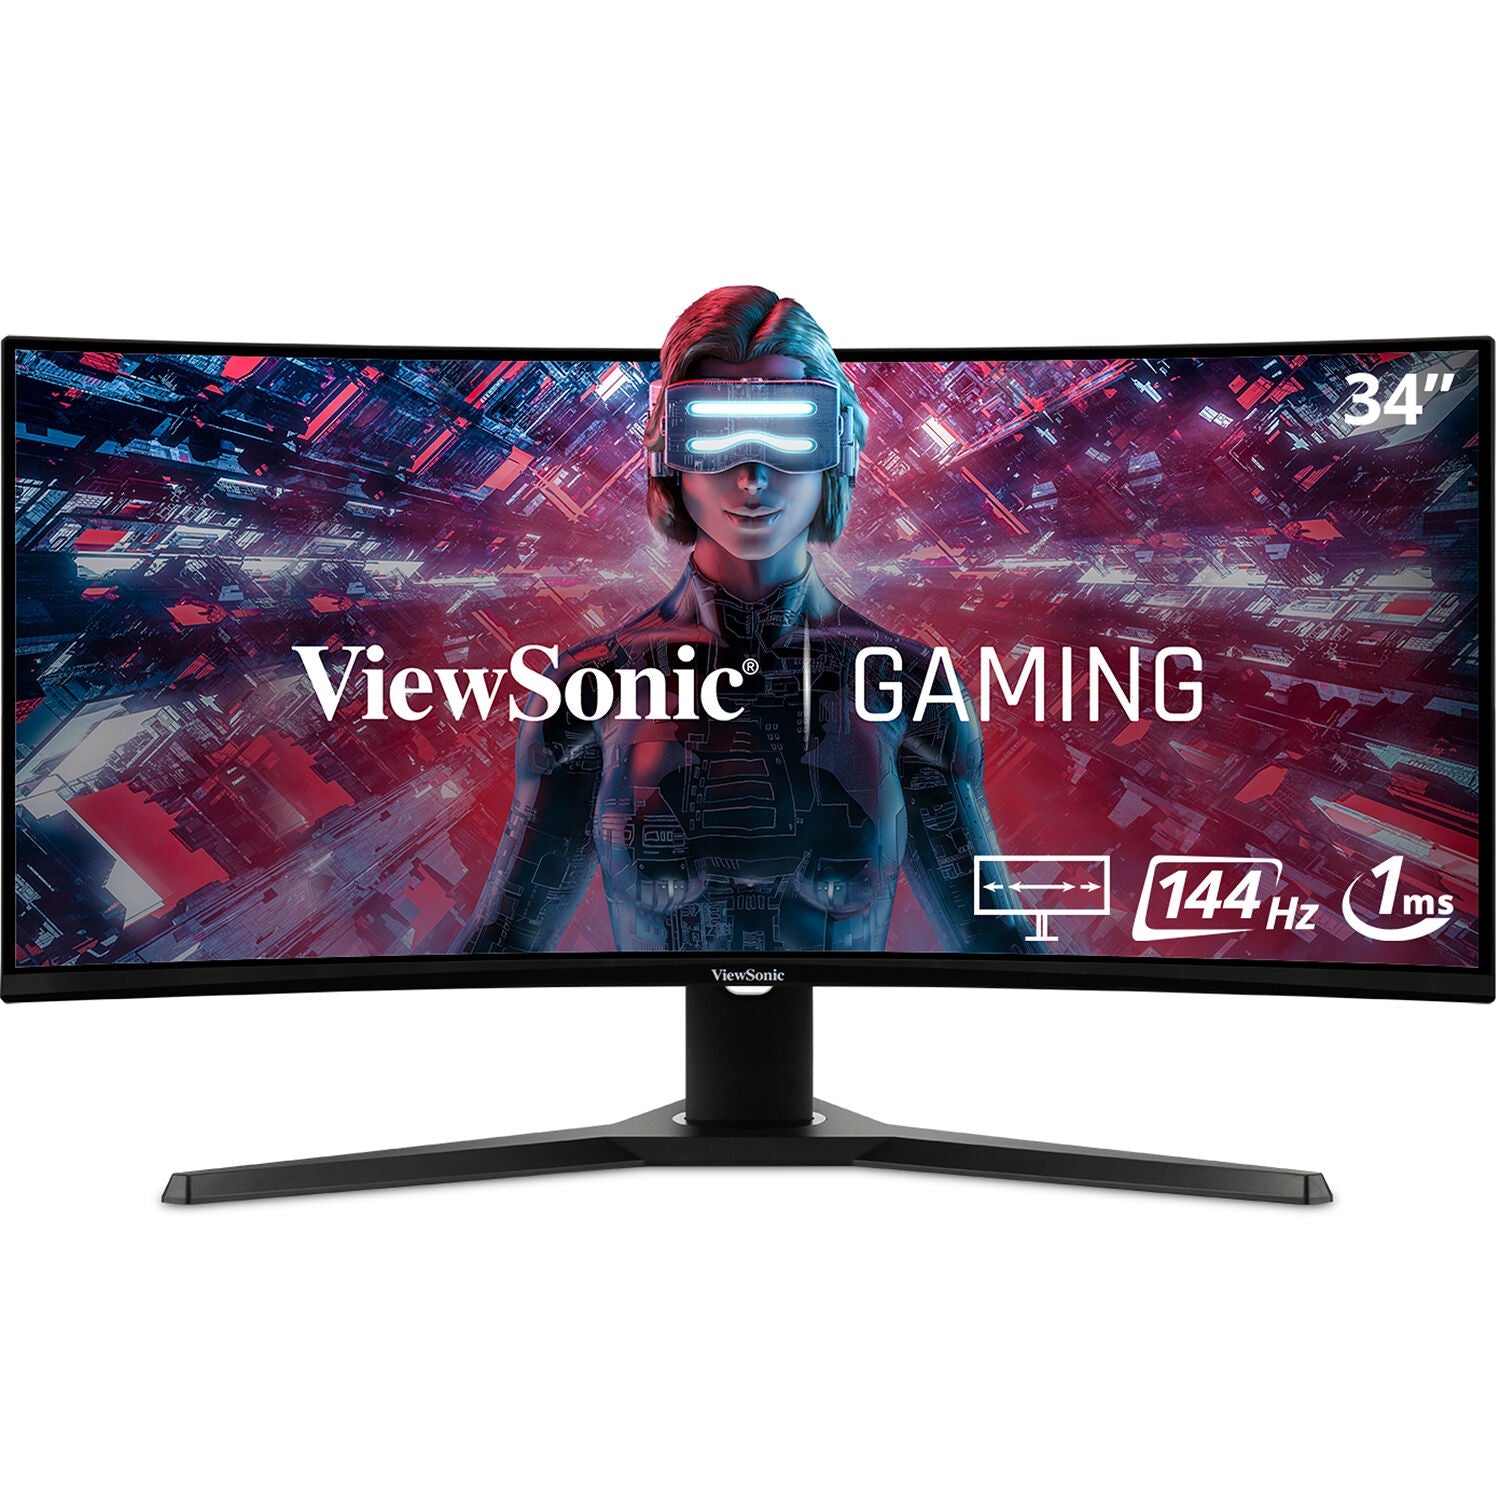 Viewsonic VX3418-2KPC 34" 144Hz Ultrawide Curved Gaming Monitor - Certified Refurbished